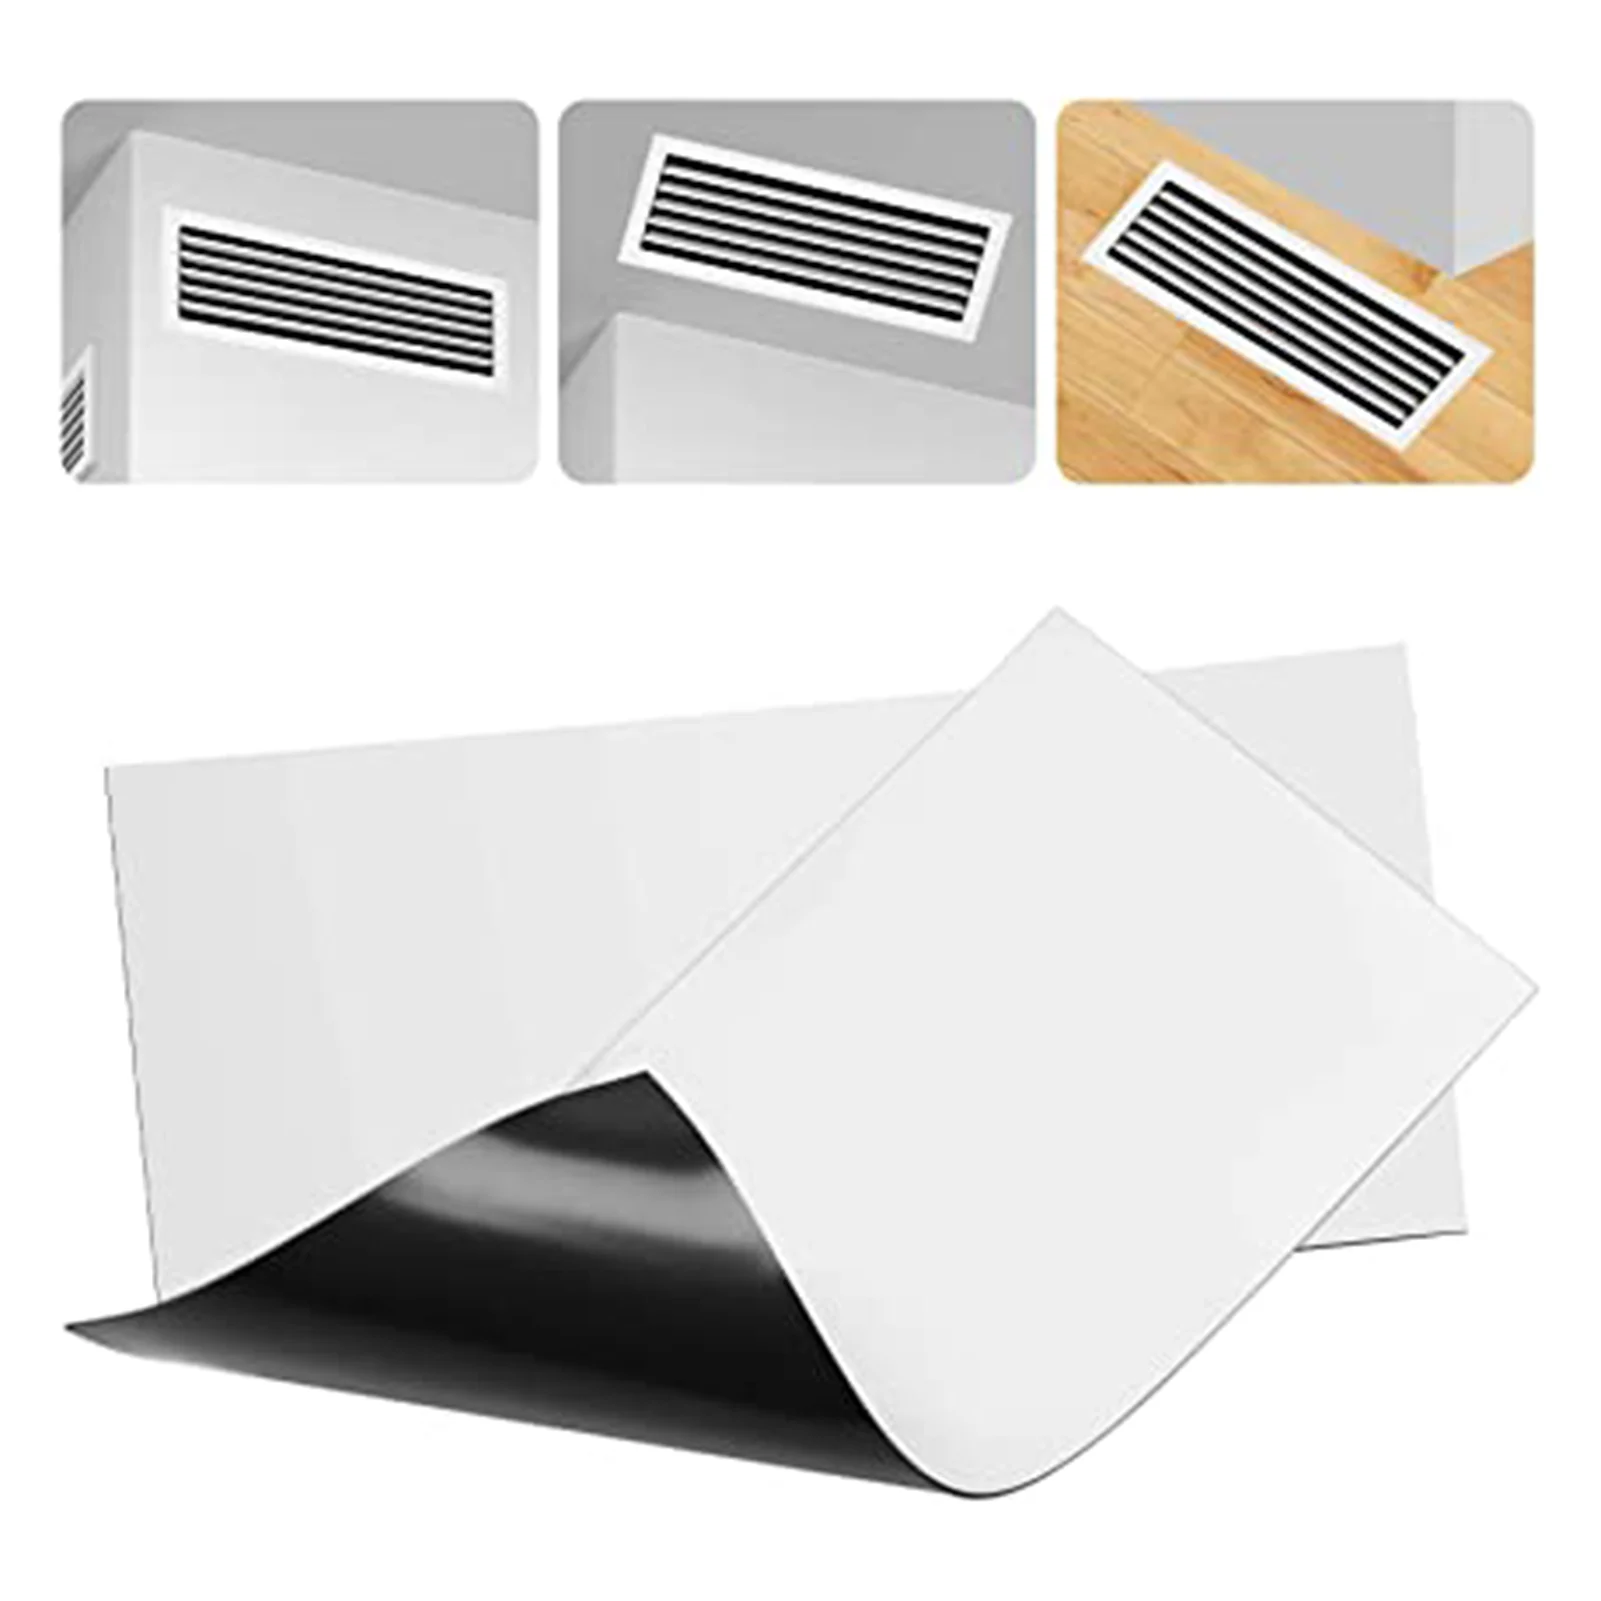 

2PCS Air Conditioning Ventilation Covers Sticks Tightly Concise Appearance Vent Cover for RV Home HVAC and AC Vents